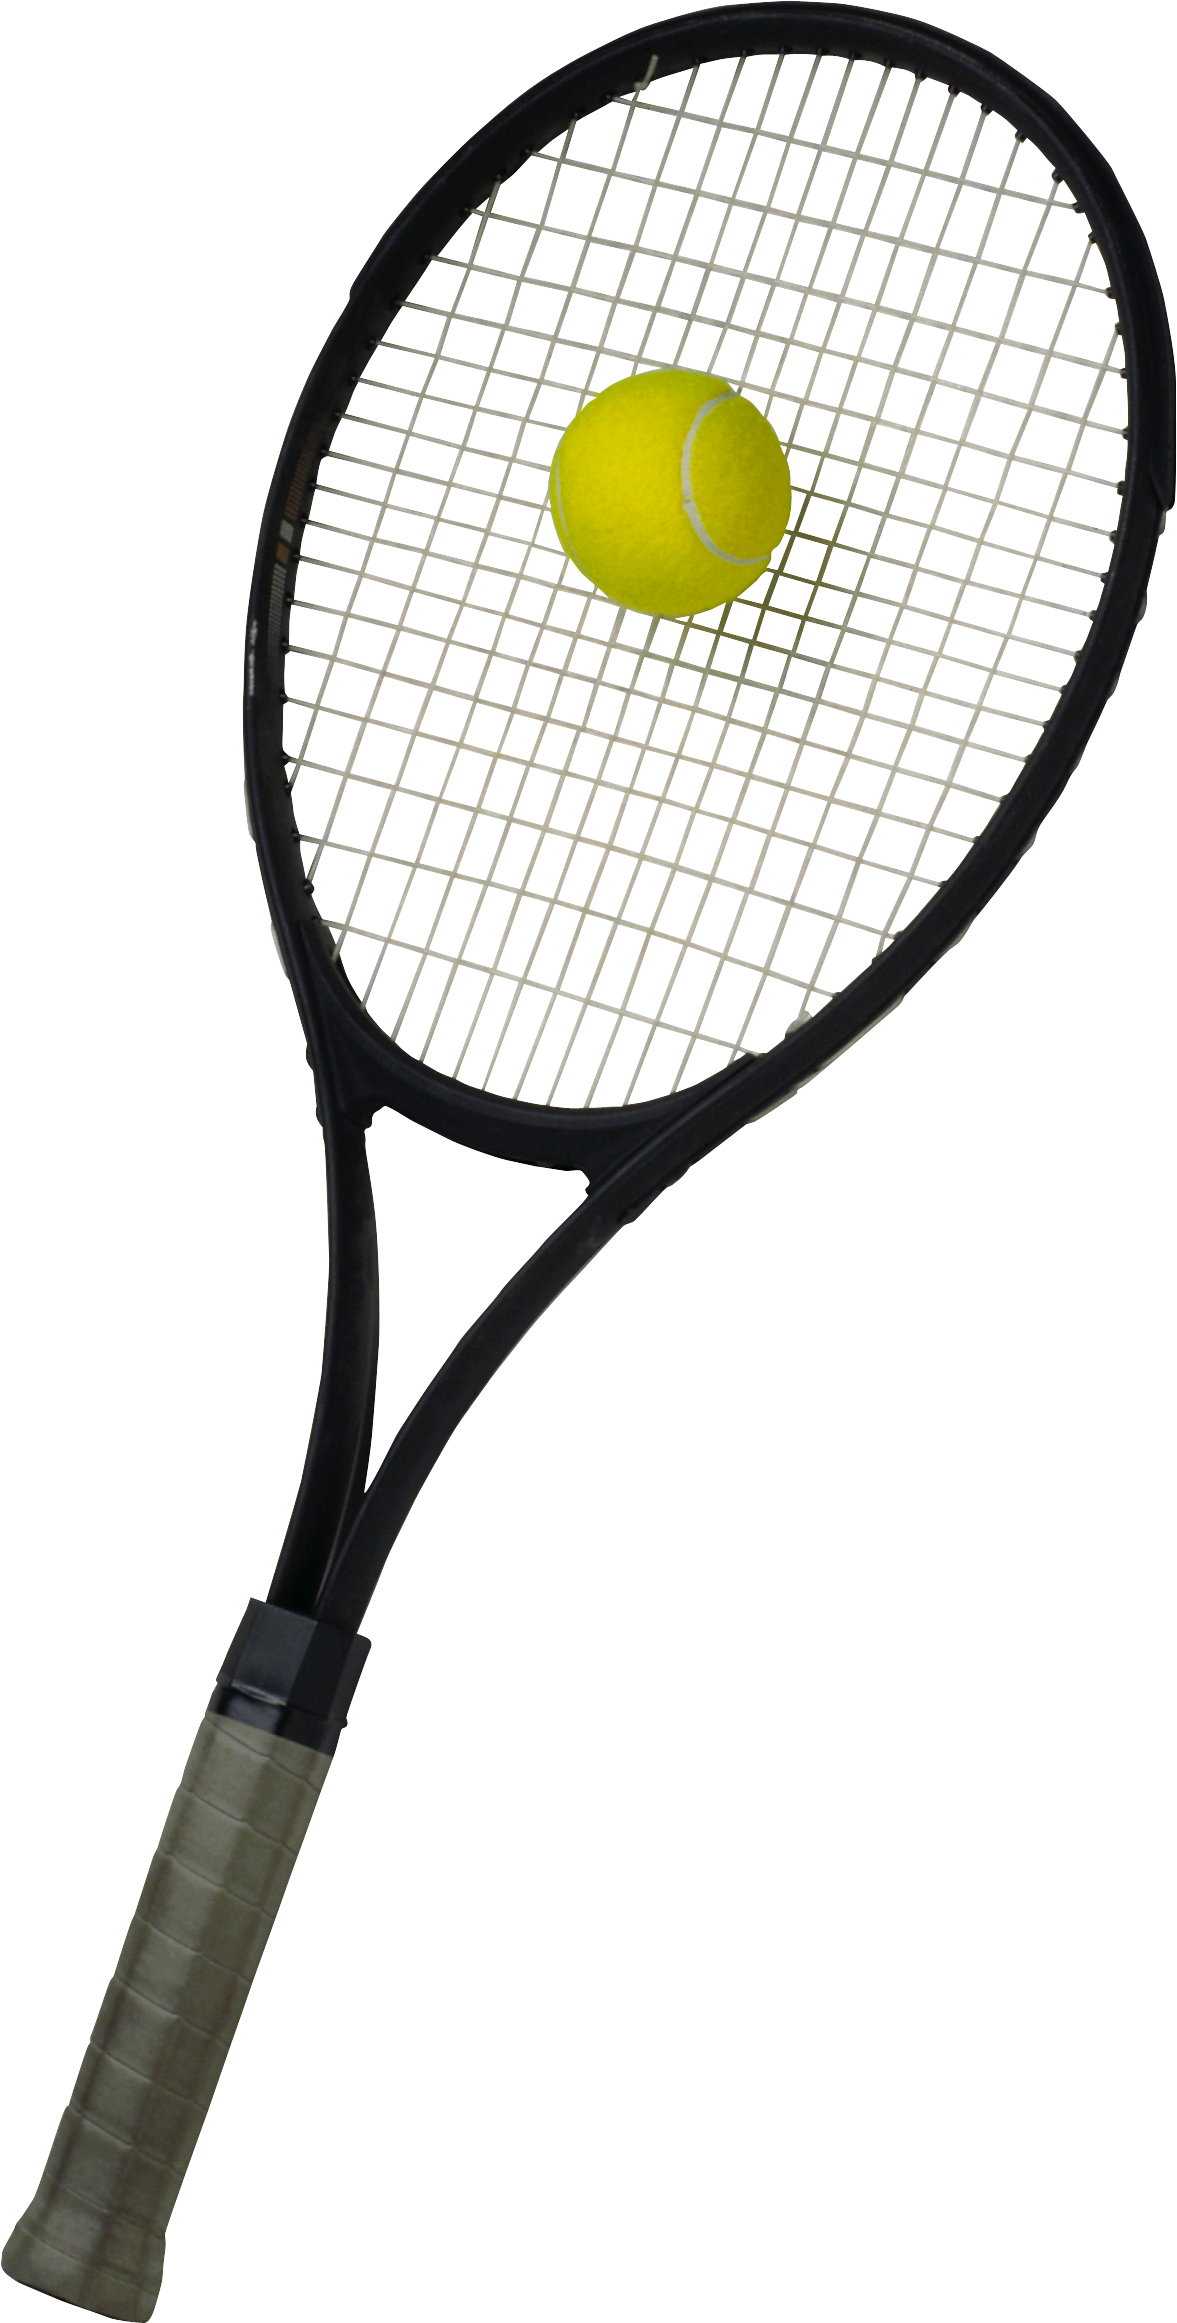 Tennis Racket And Ball Transparent Png Clip Art Image Tennis Ball And